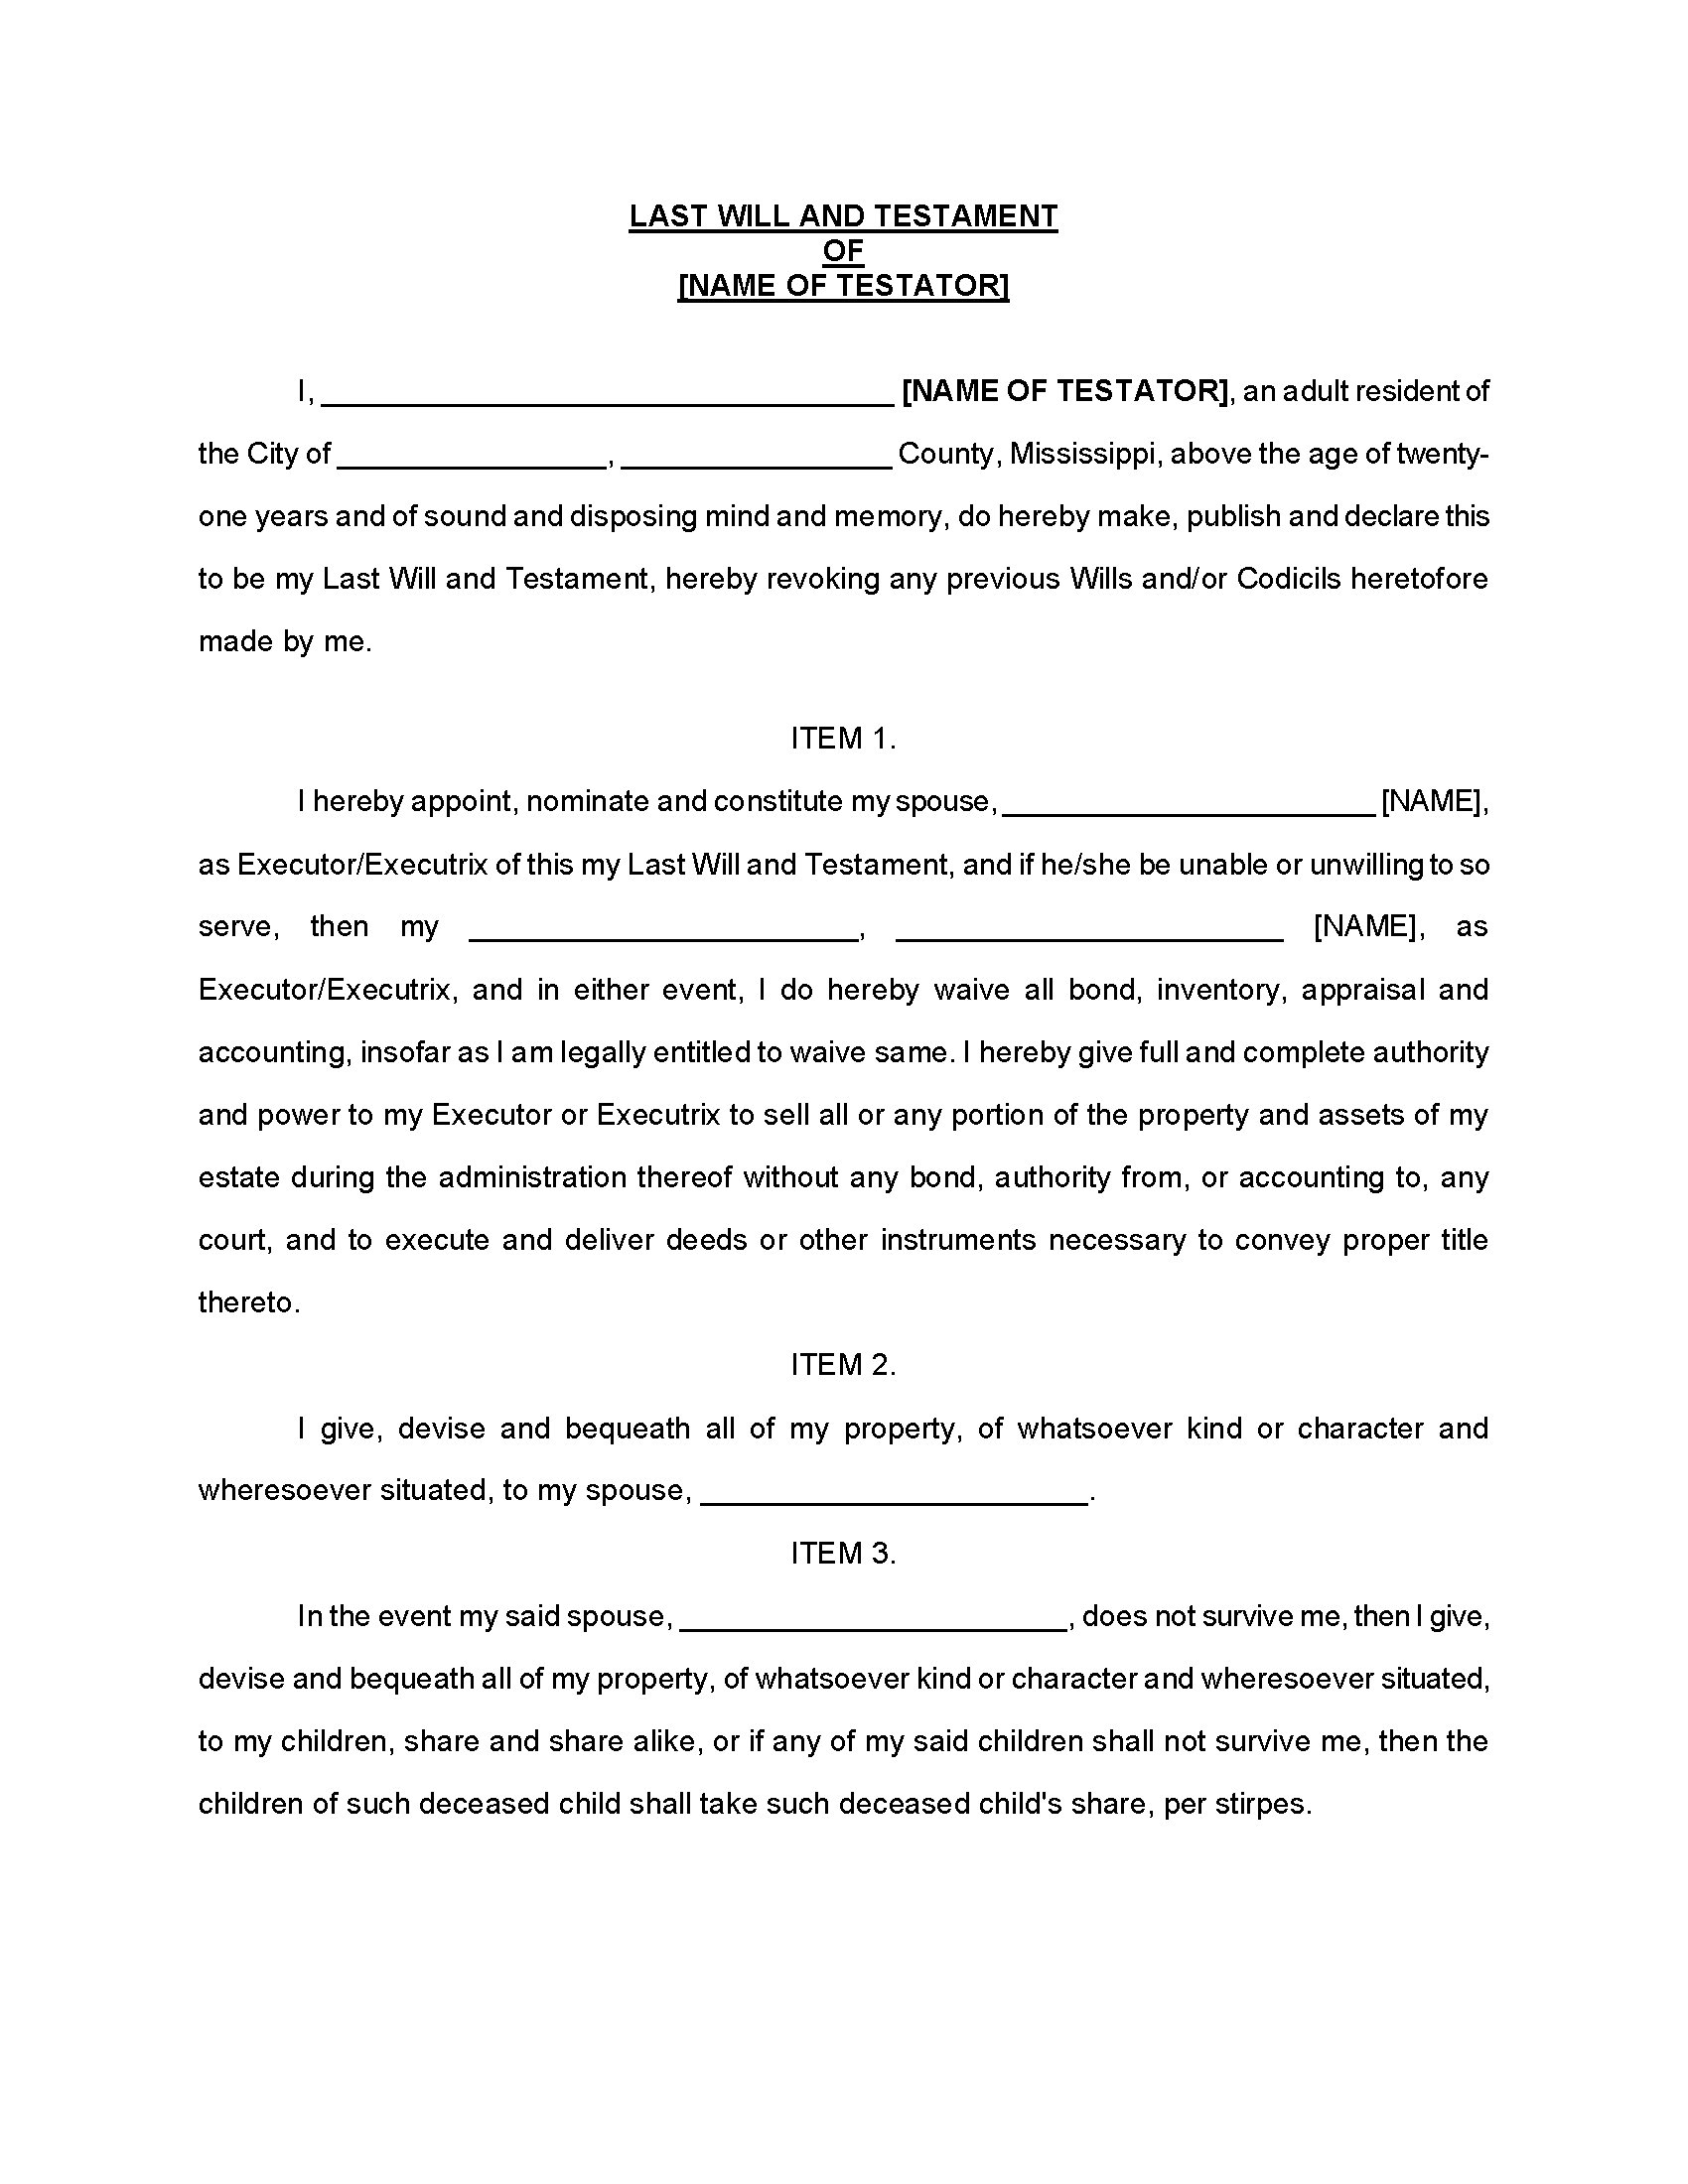 Mississippi Simple Last Will & Testament | Legal Forms and ...